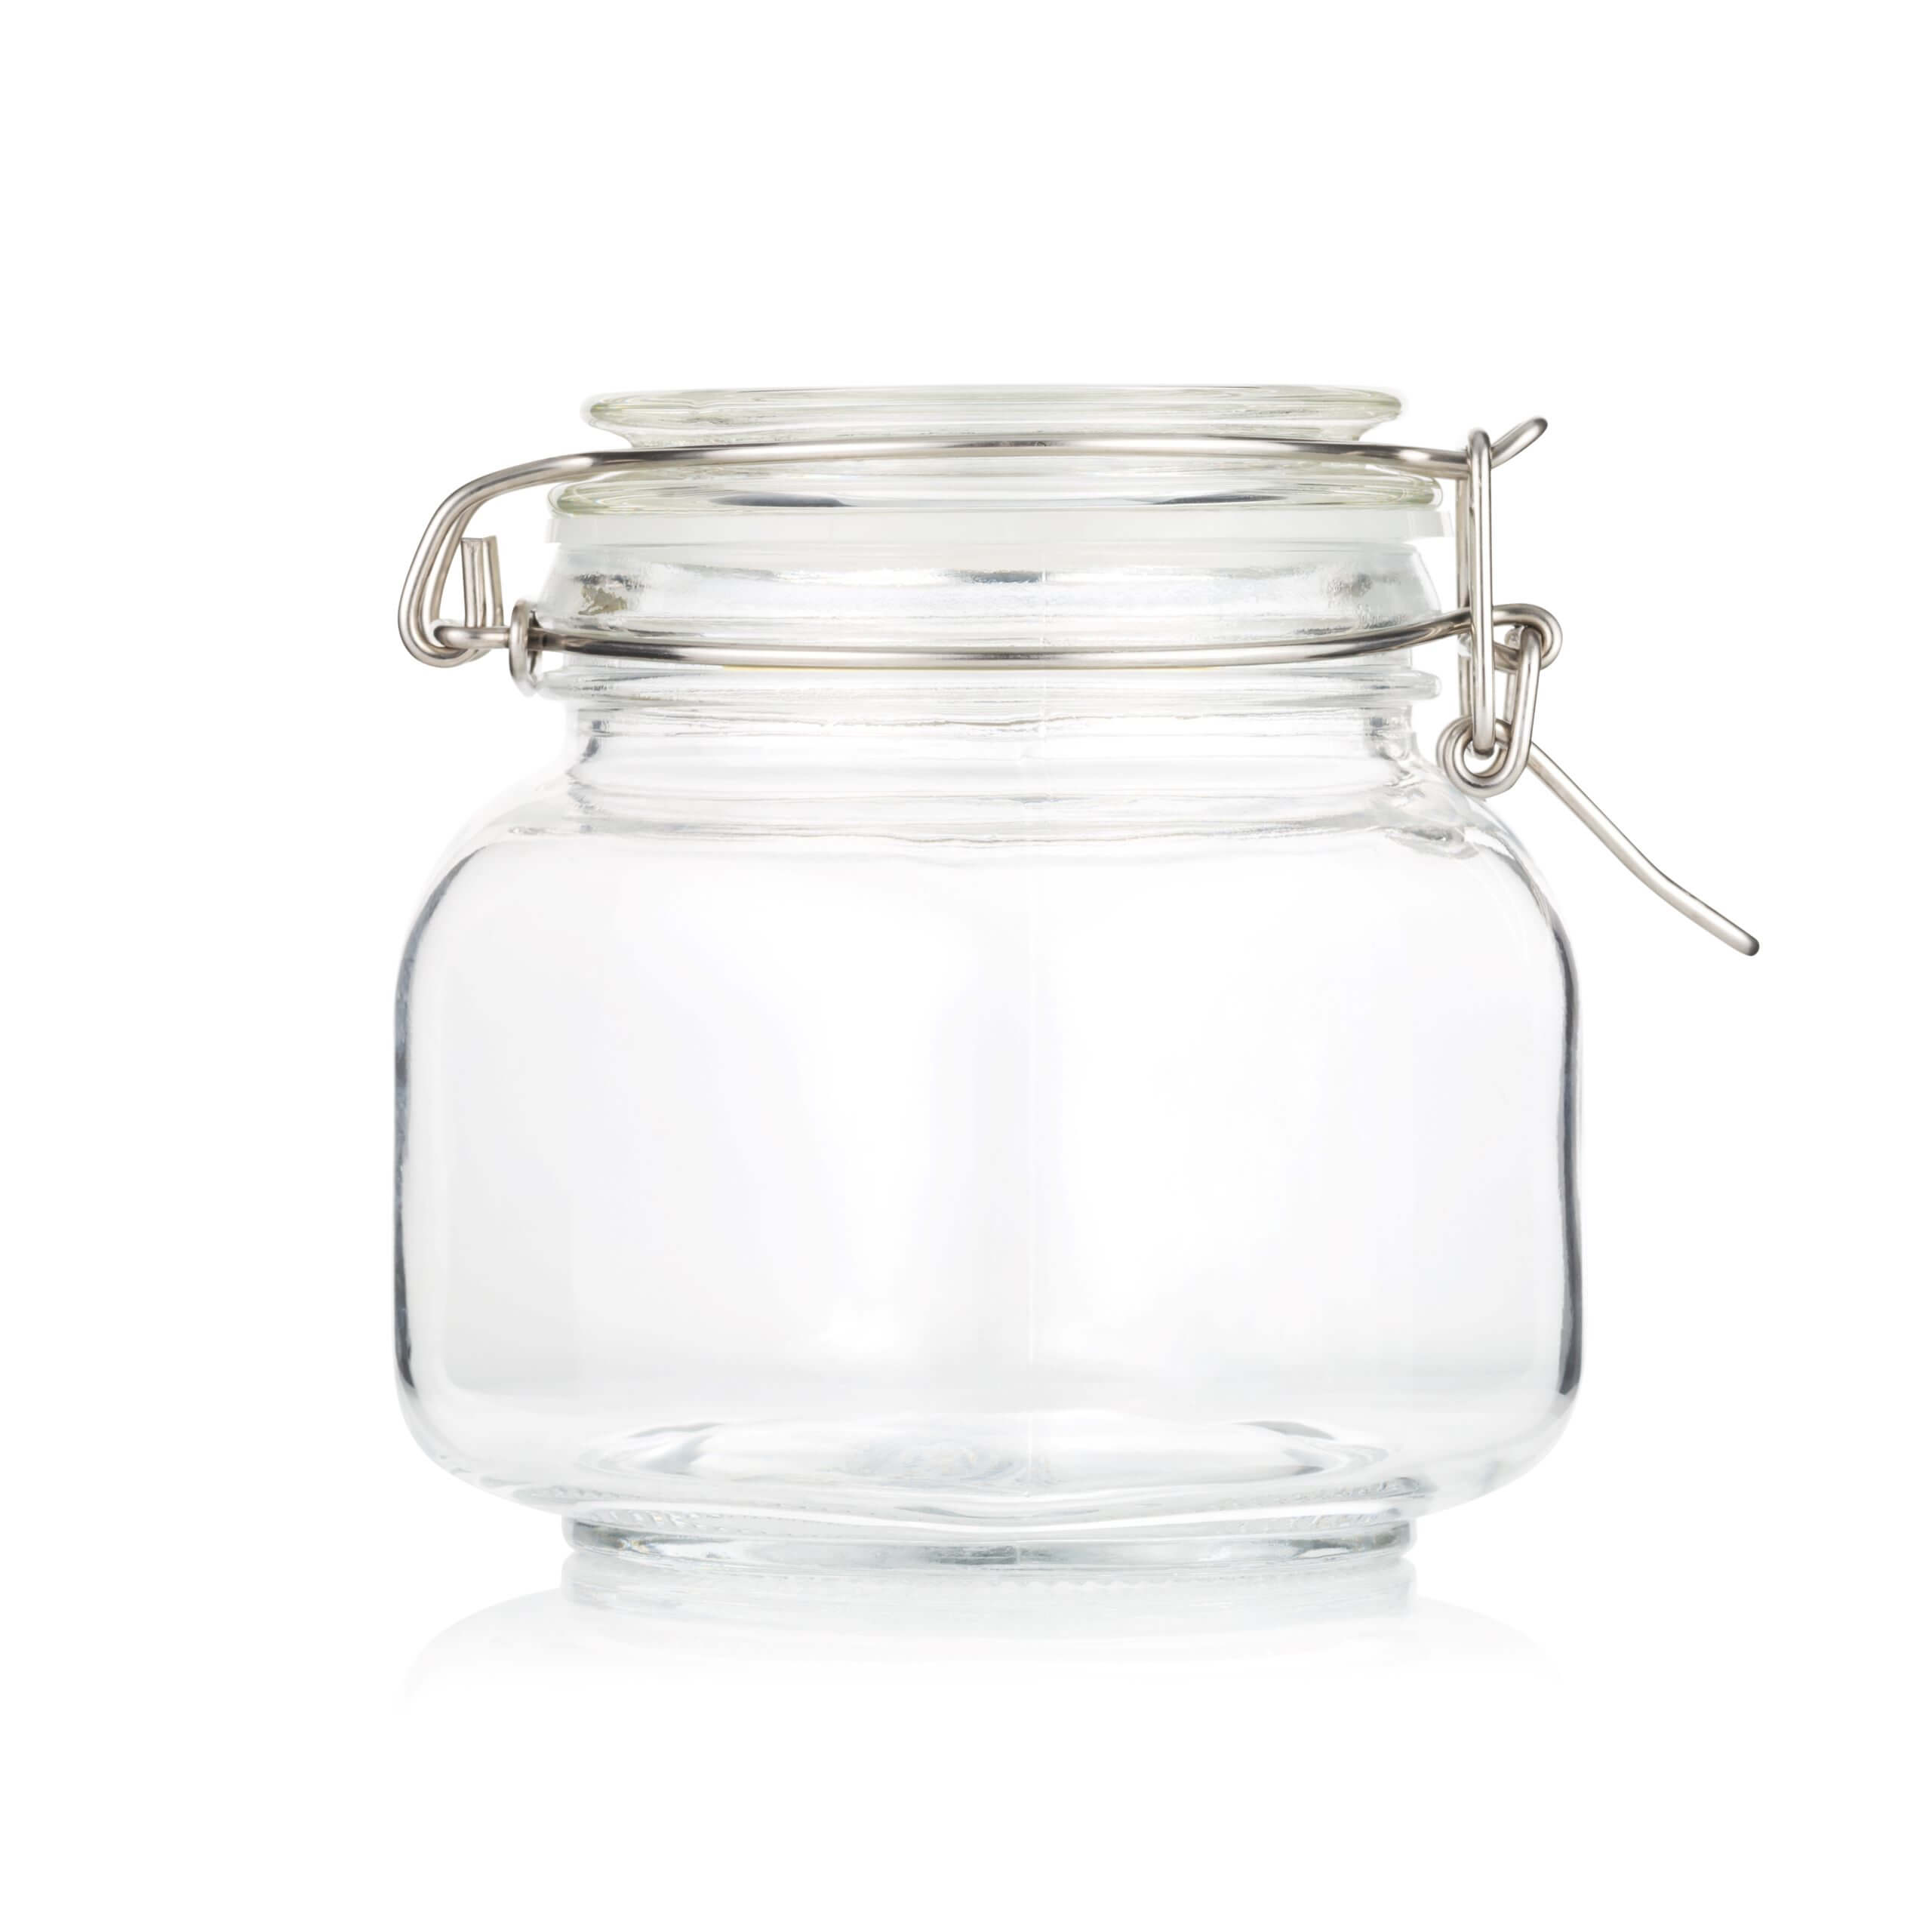 An image of our Jars & Lids.